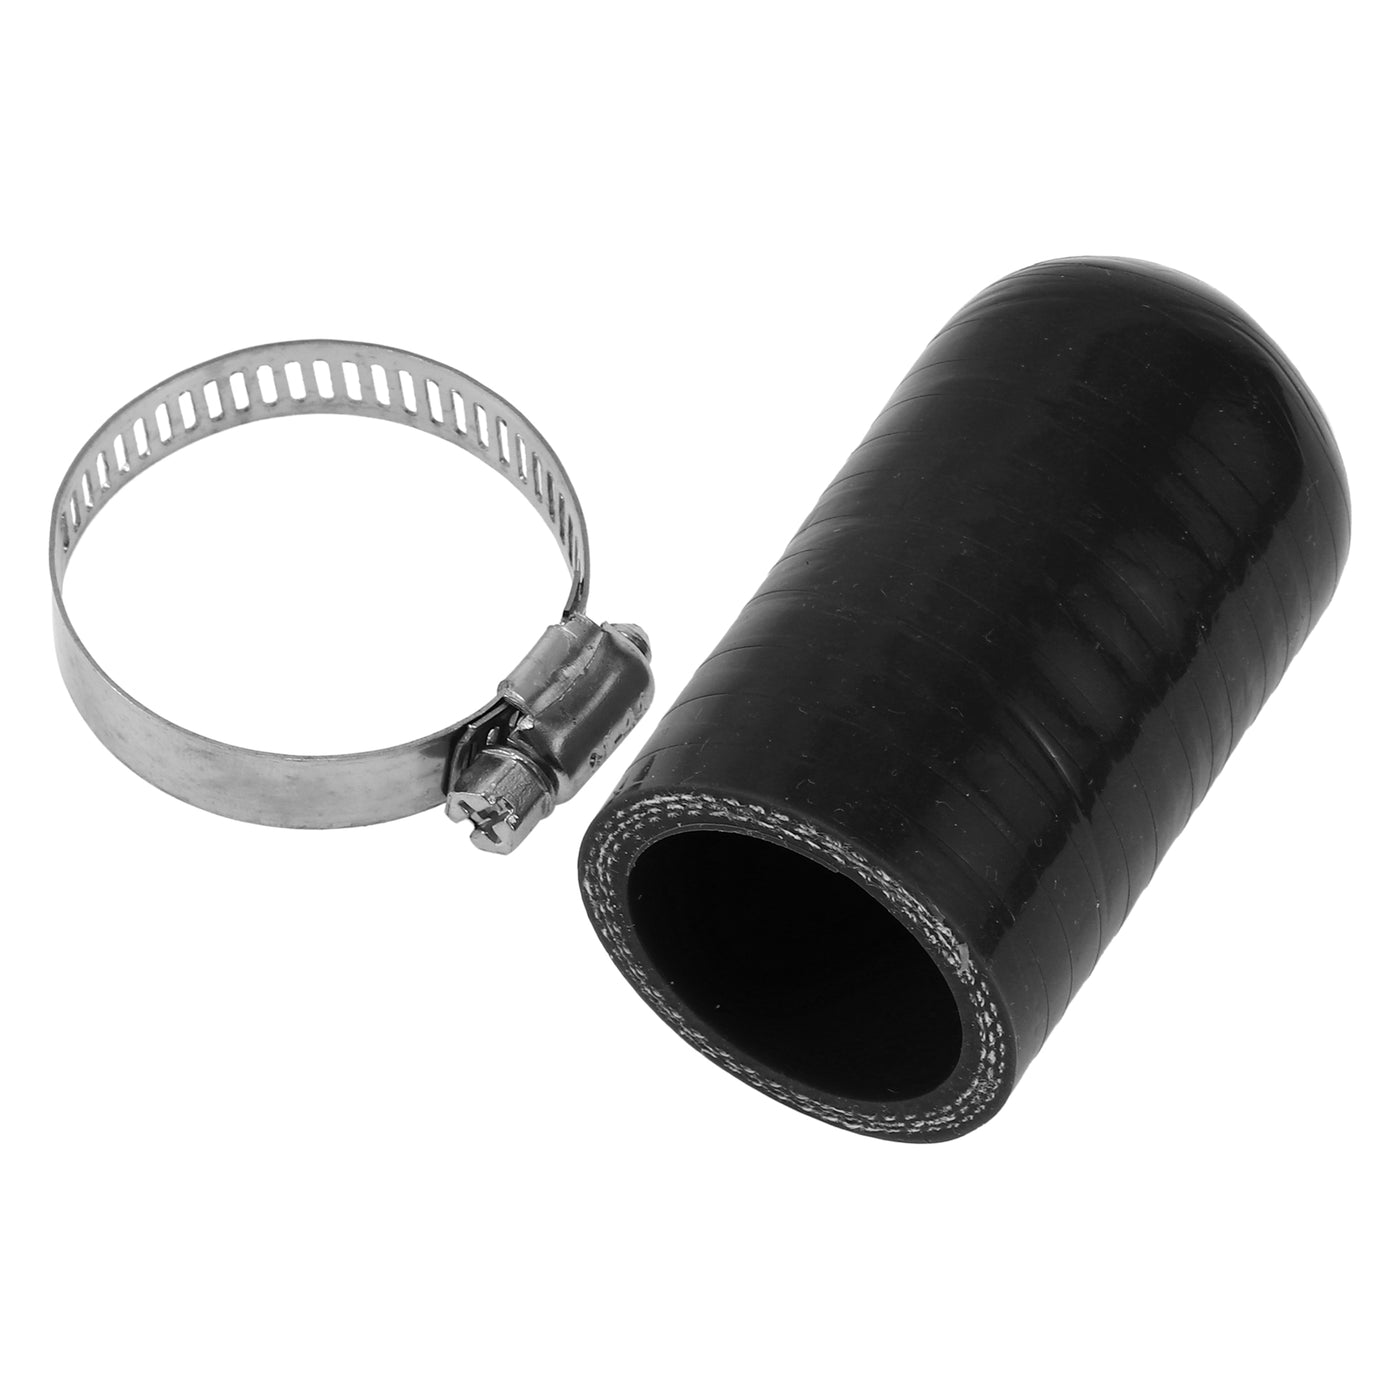 X AUTOHAUX 1 Pcs 60mm Length 32mm/1.26" ID Black Car Silicone Rubber Hose End Cap with Clamp Silicone Reinforced Blanking Cap for Bypass Tube Universal